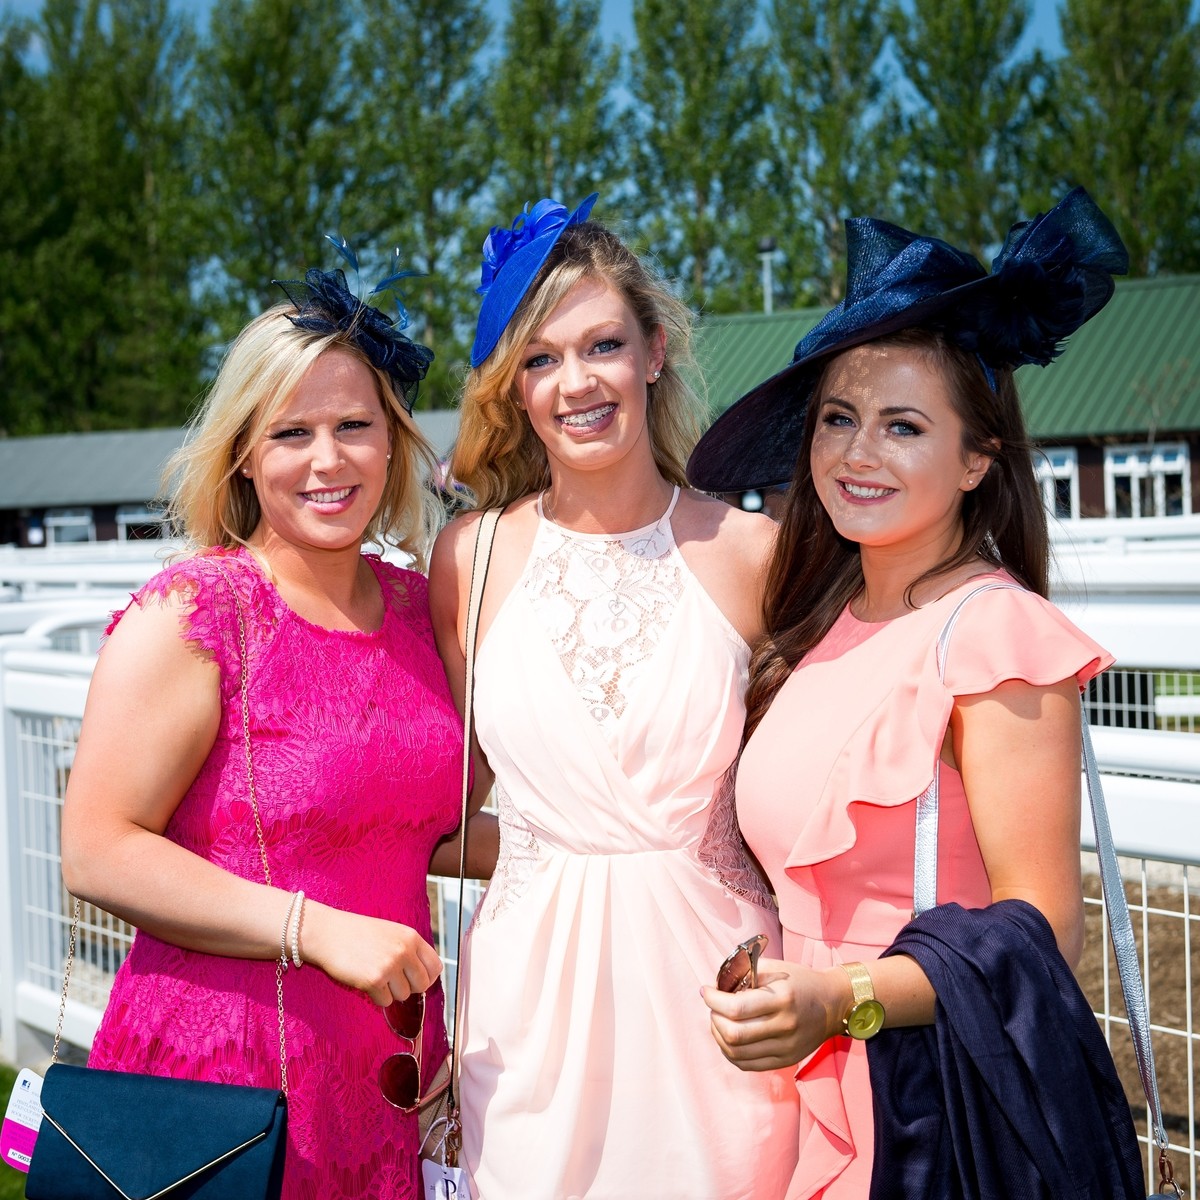 Looking great ladies! We loved all the different outfits and hats on the day.